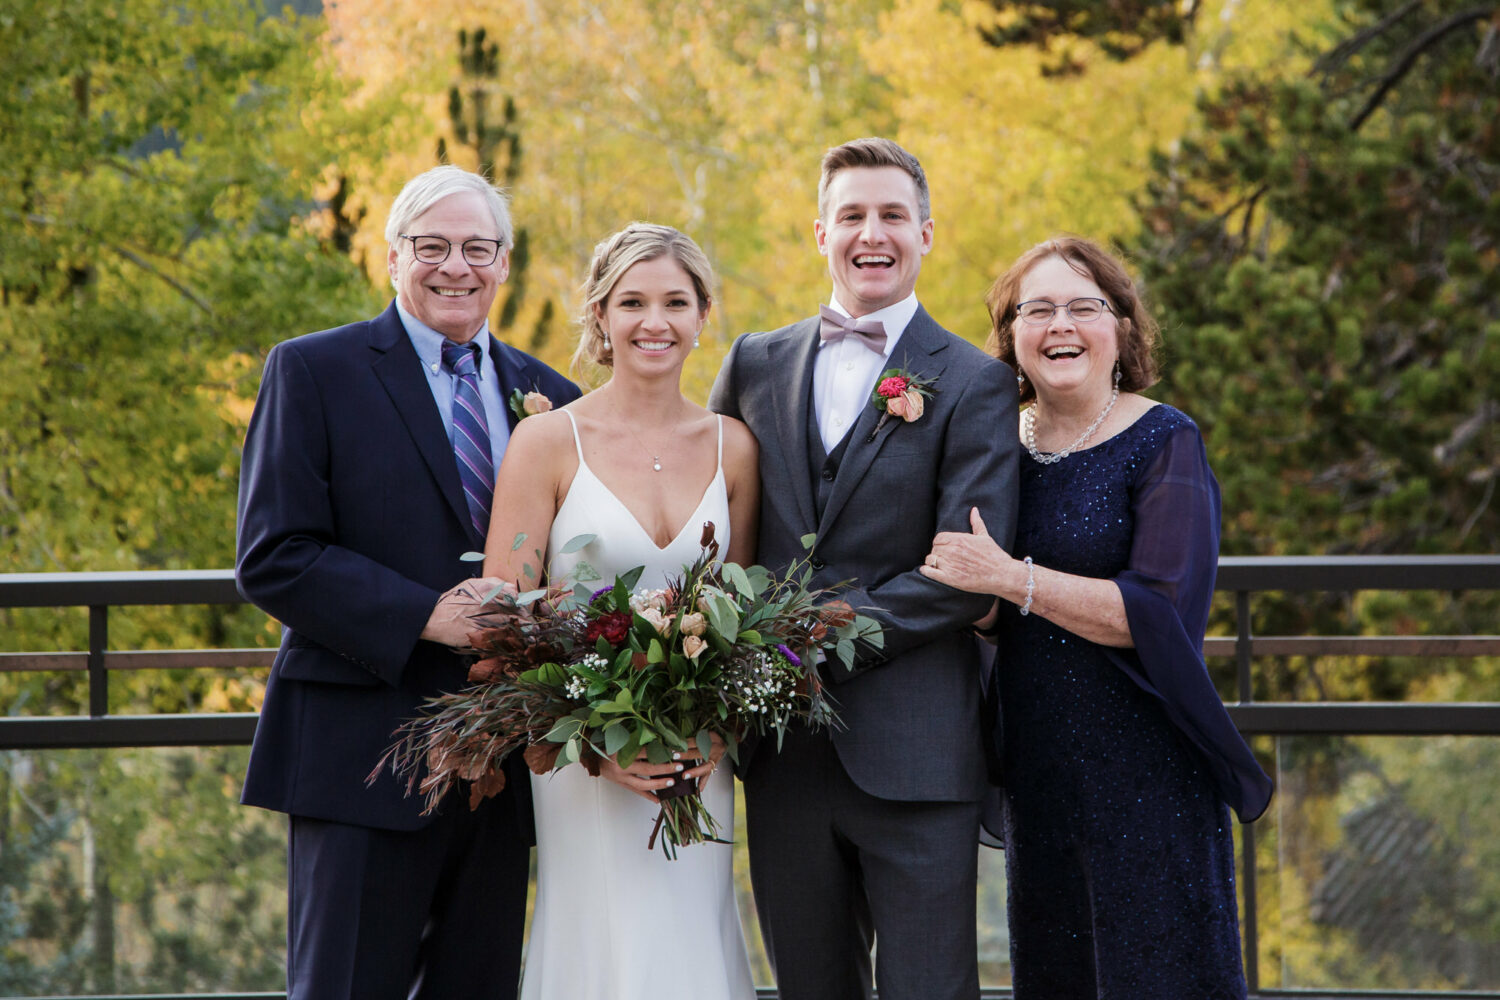 Bride and groom with their parents at a fall wedding in Lake Tahoe with yellow leaves in the background.